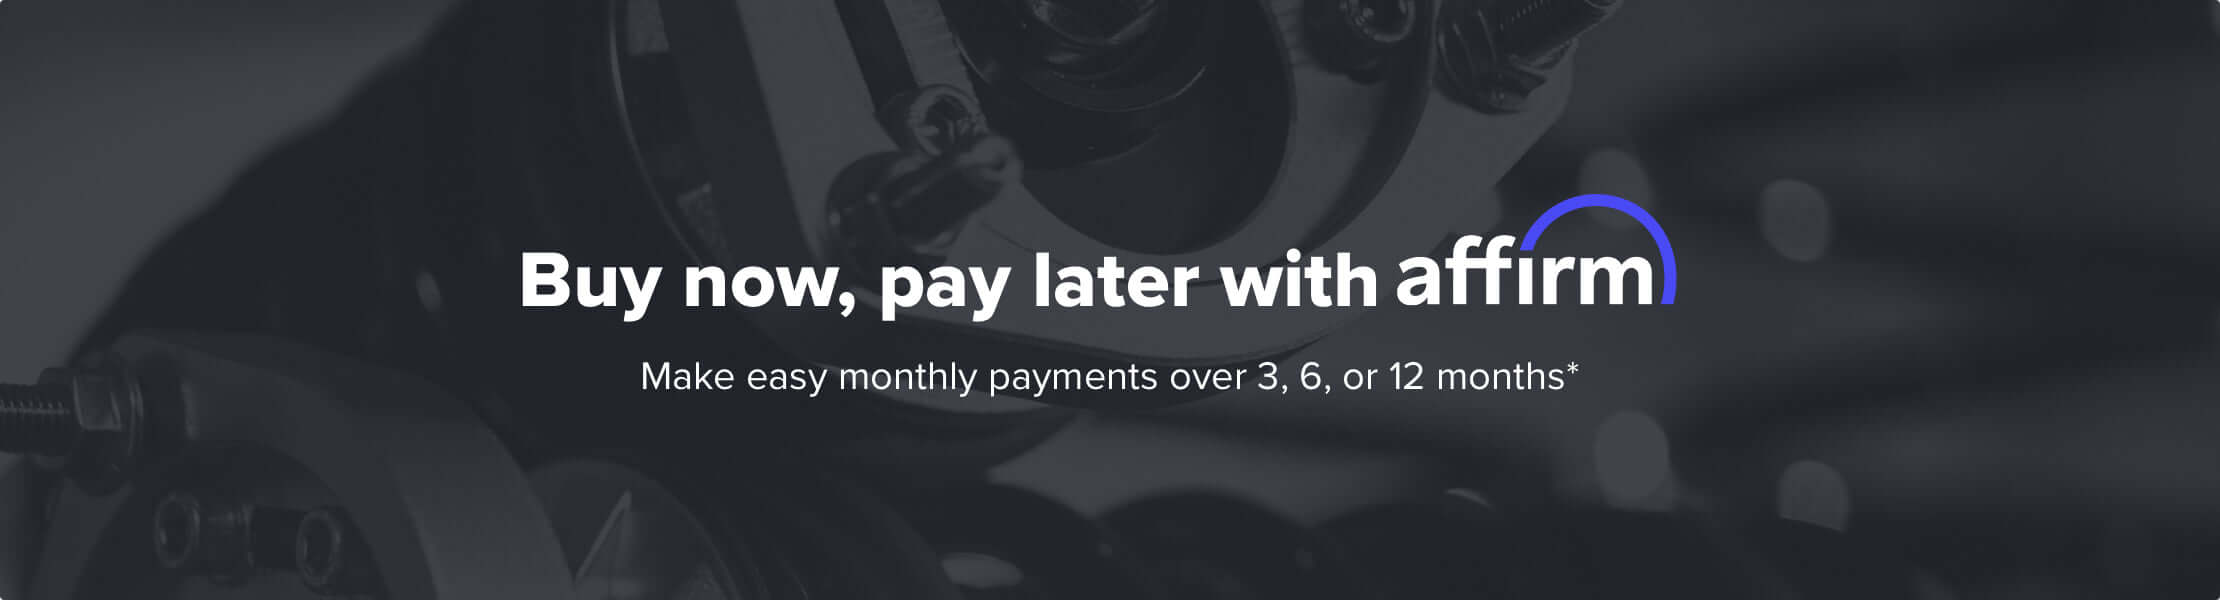 Buy now, pay later with Affirm